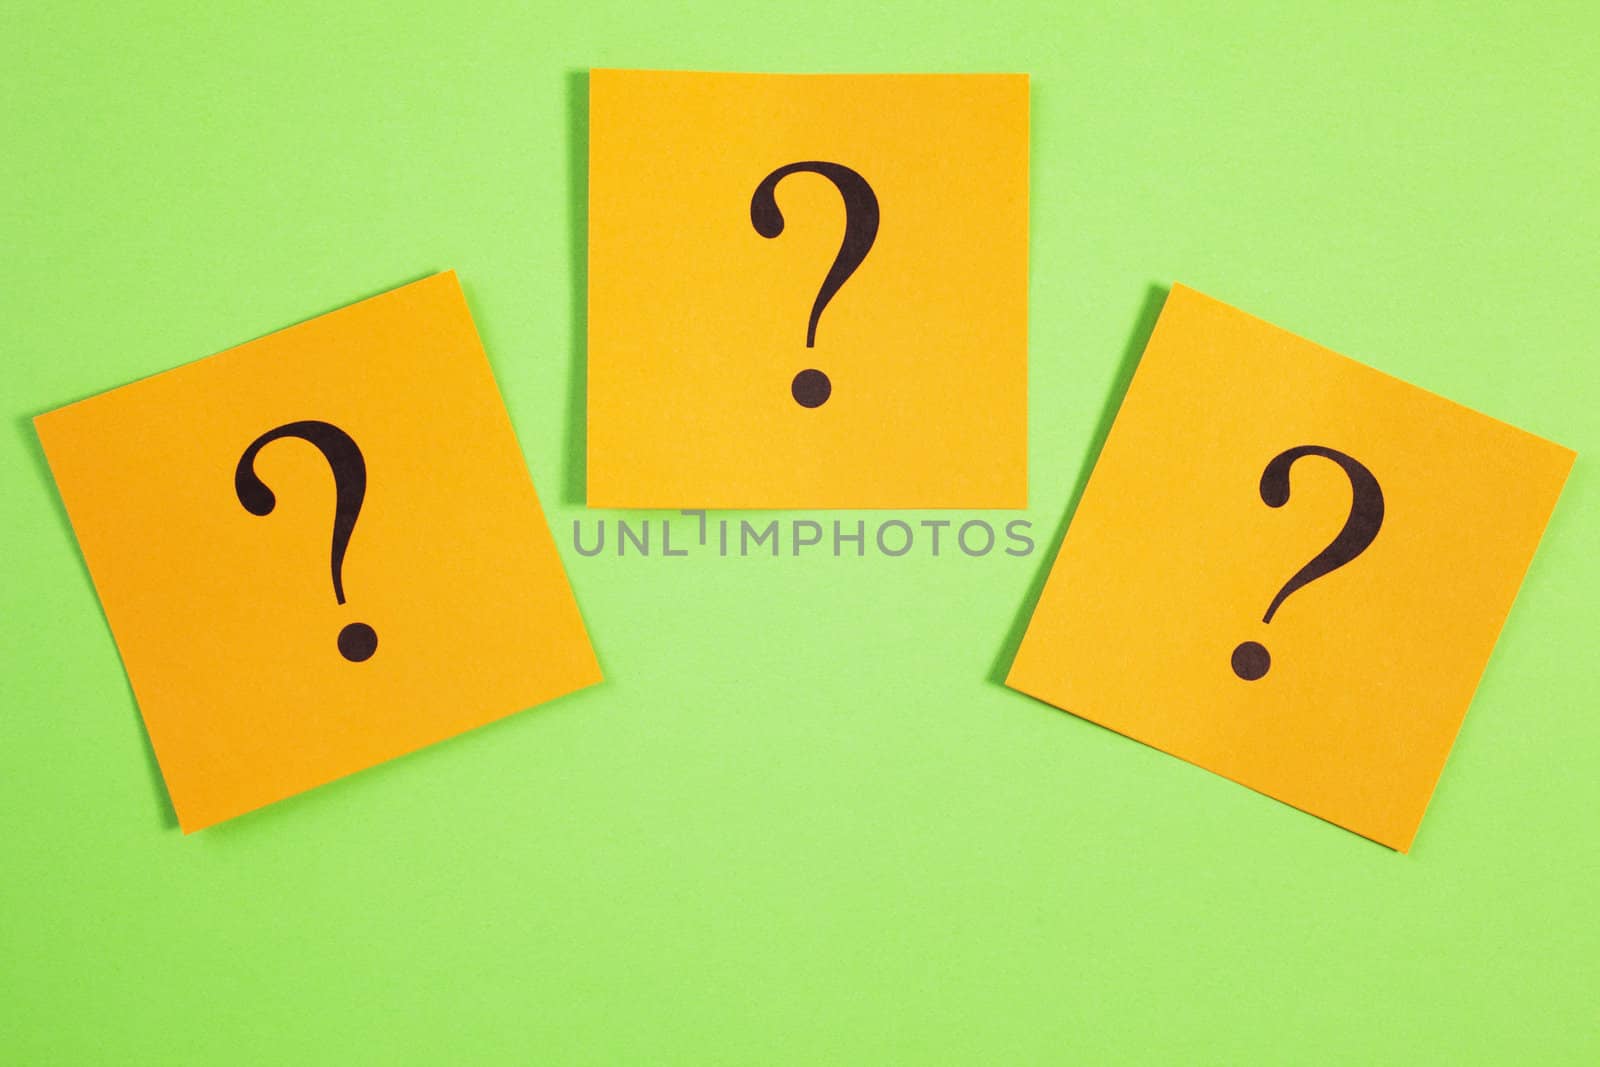 Three Question Marks Orange on Green Background by Travelling-light